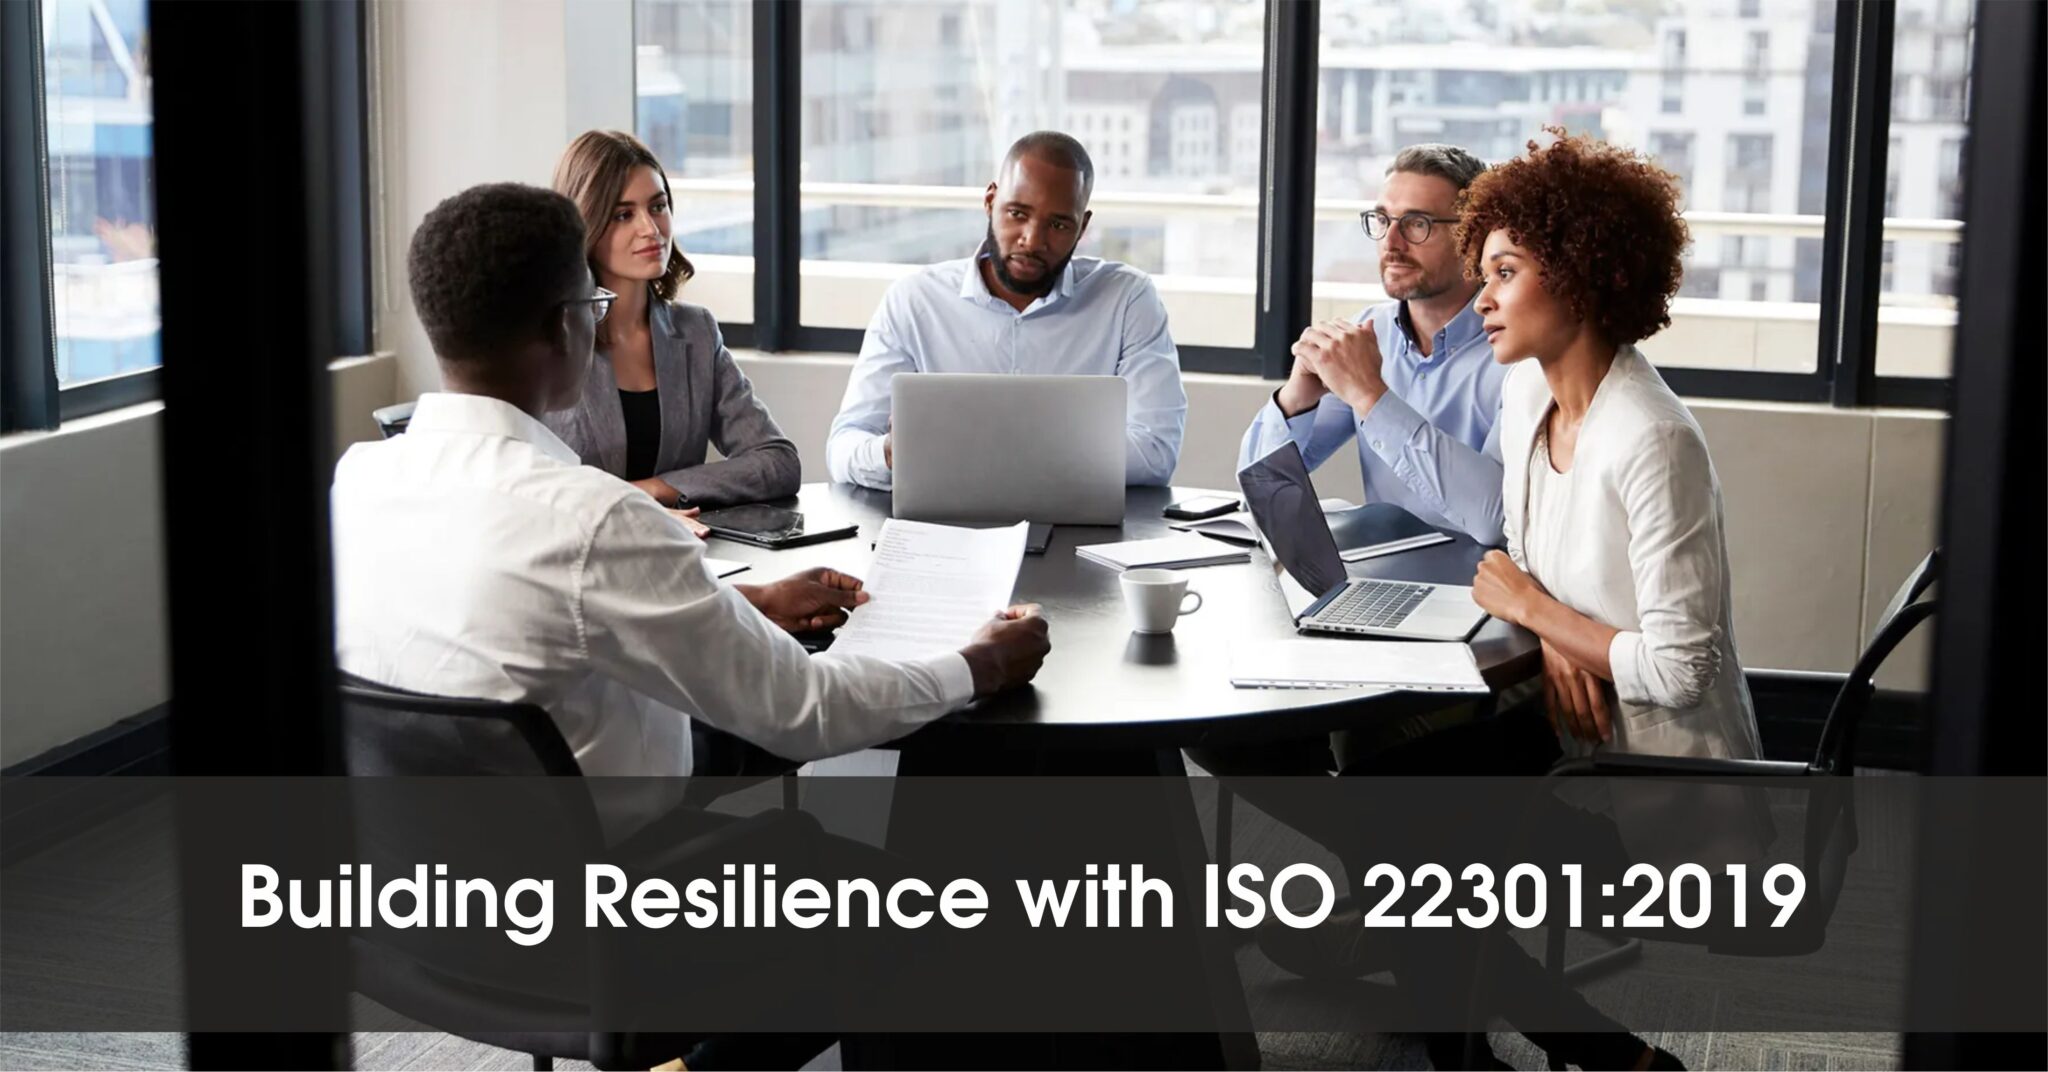 Building Resilience with ISO 22301:2019 – The Path to Success